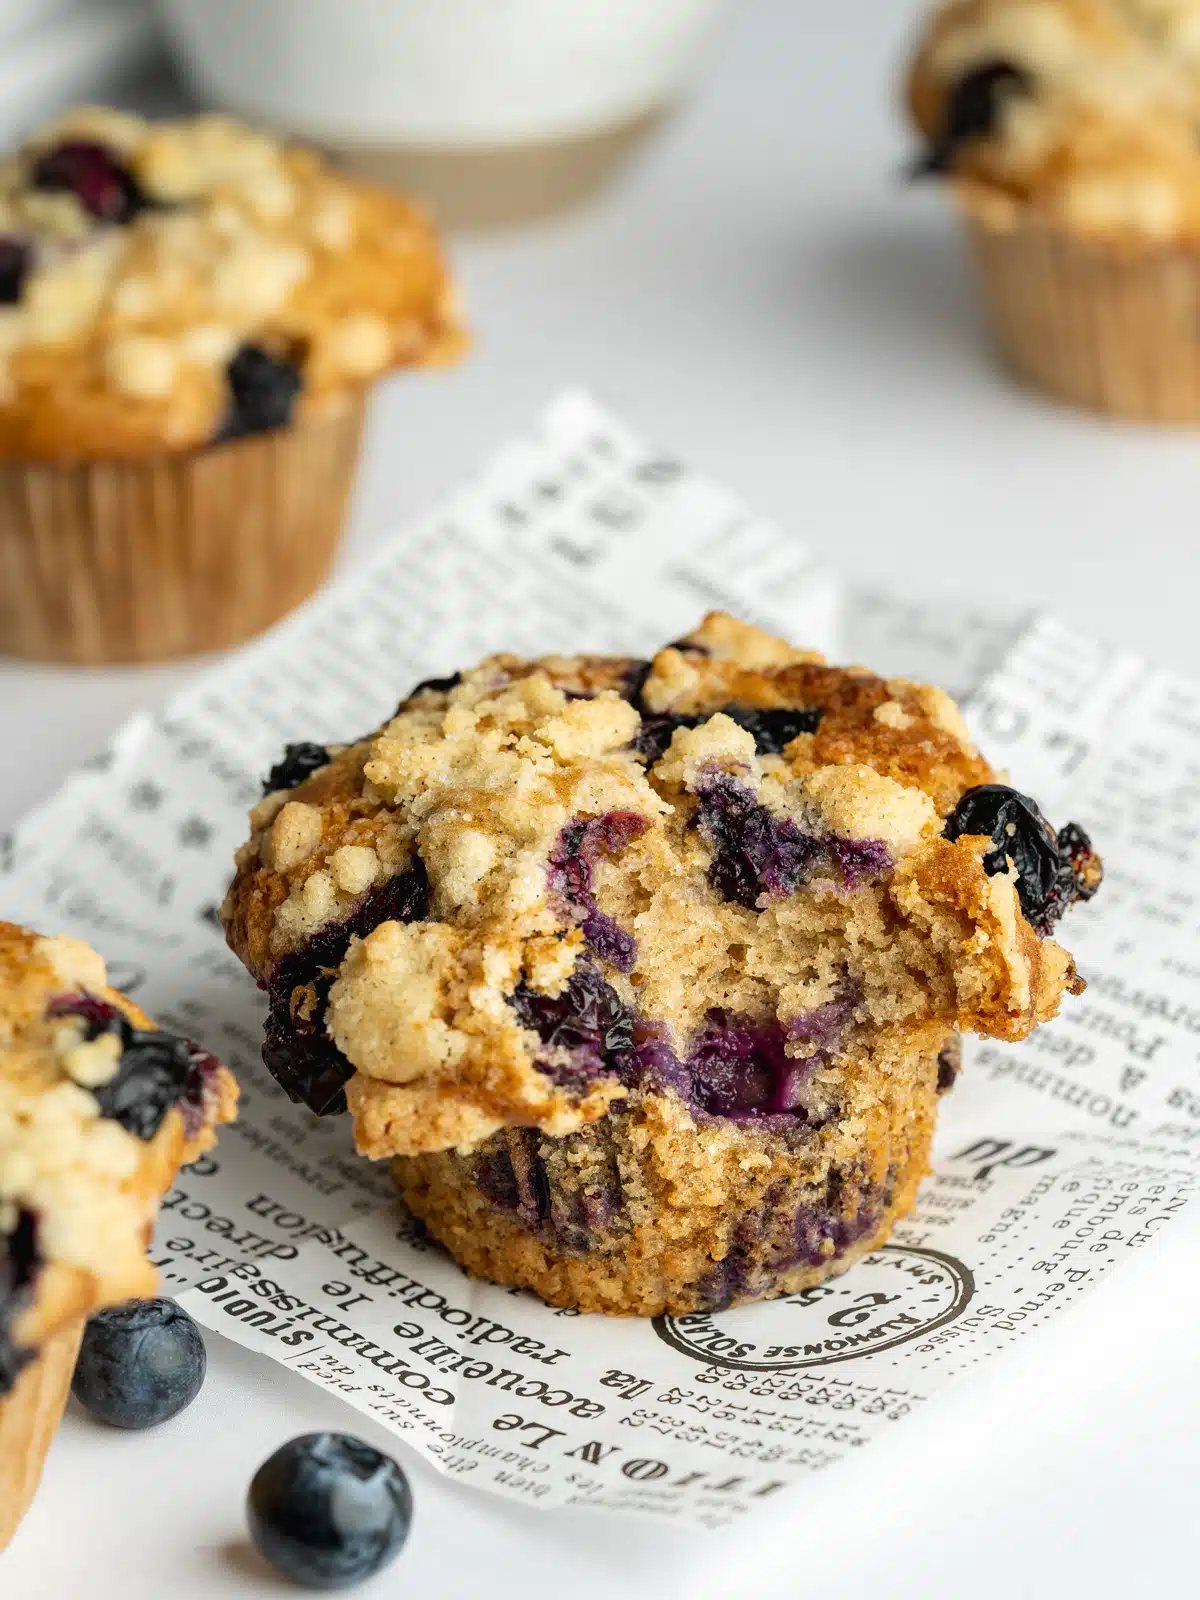 freshly baked blueberry muffins on a sheet of newspaper with a bite taken from one of them showing the moist interior.